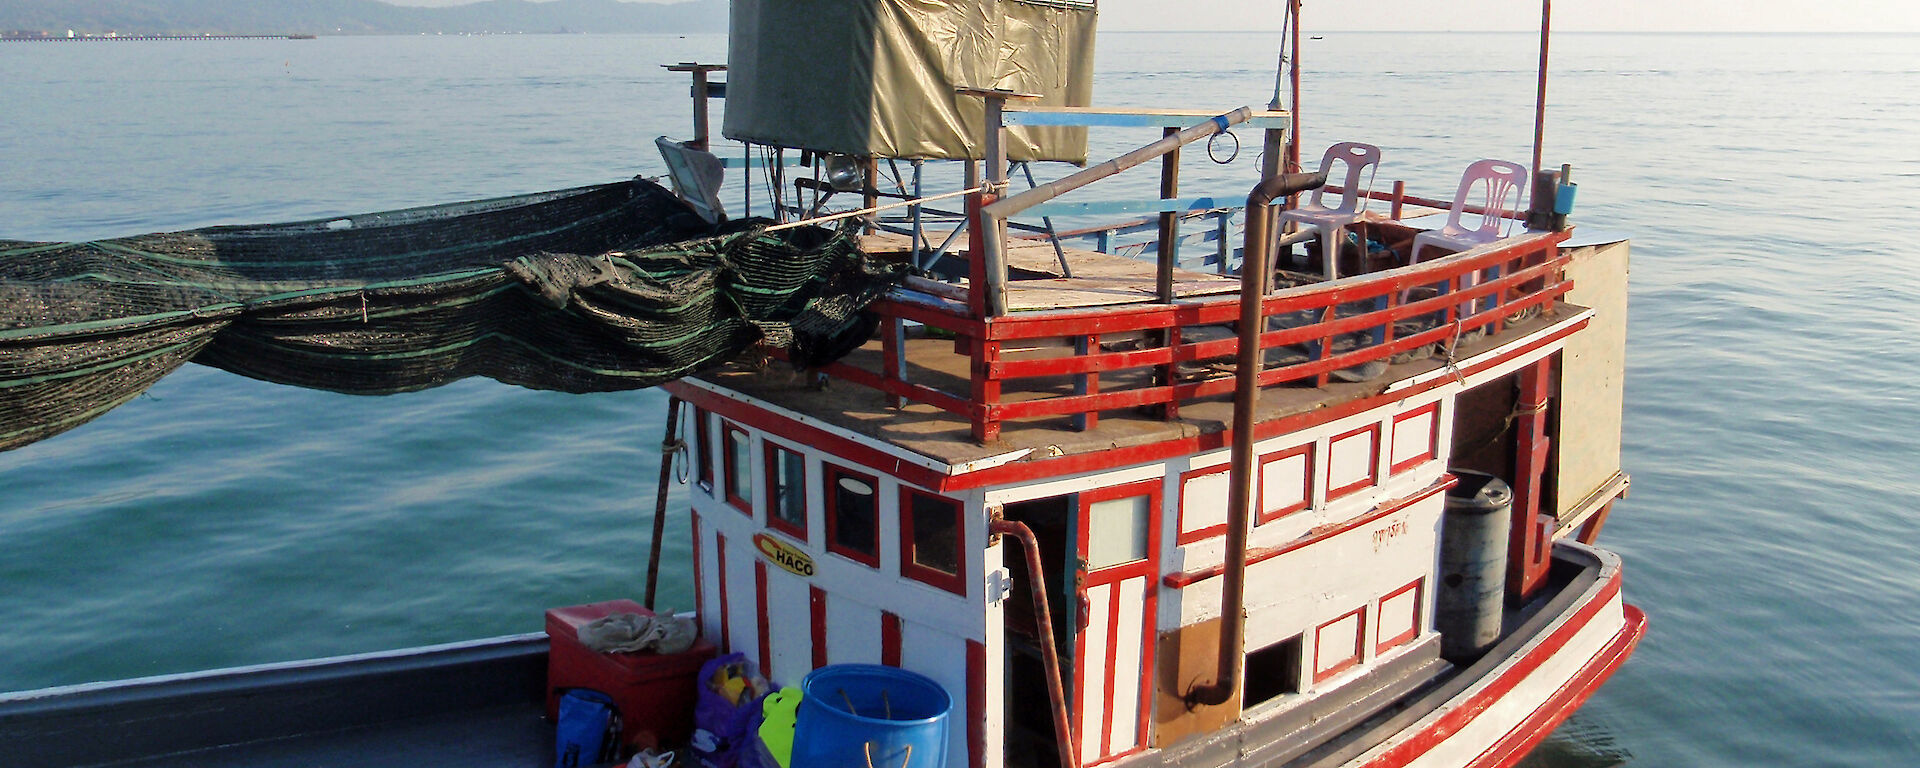 A Thai vessel that Professor Hines’ research team will use to undertake the cetacean survey work.